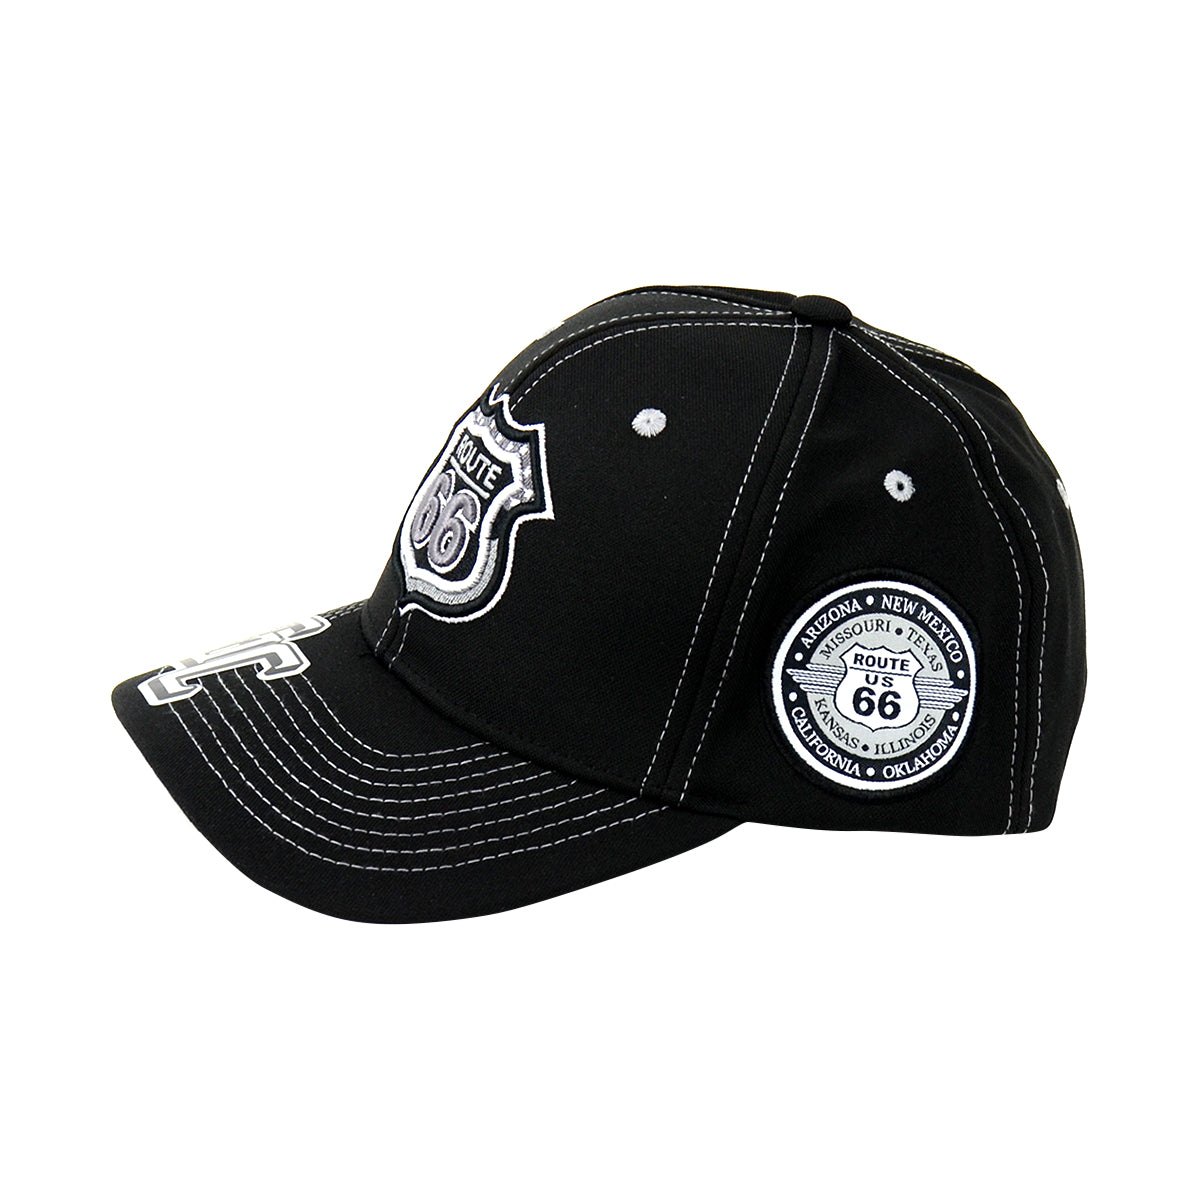 Snapback ROUTE 66 Hat Embroidered